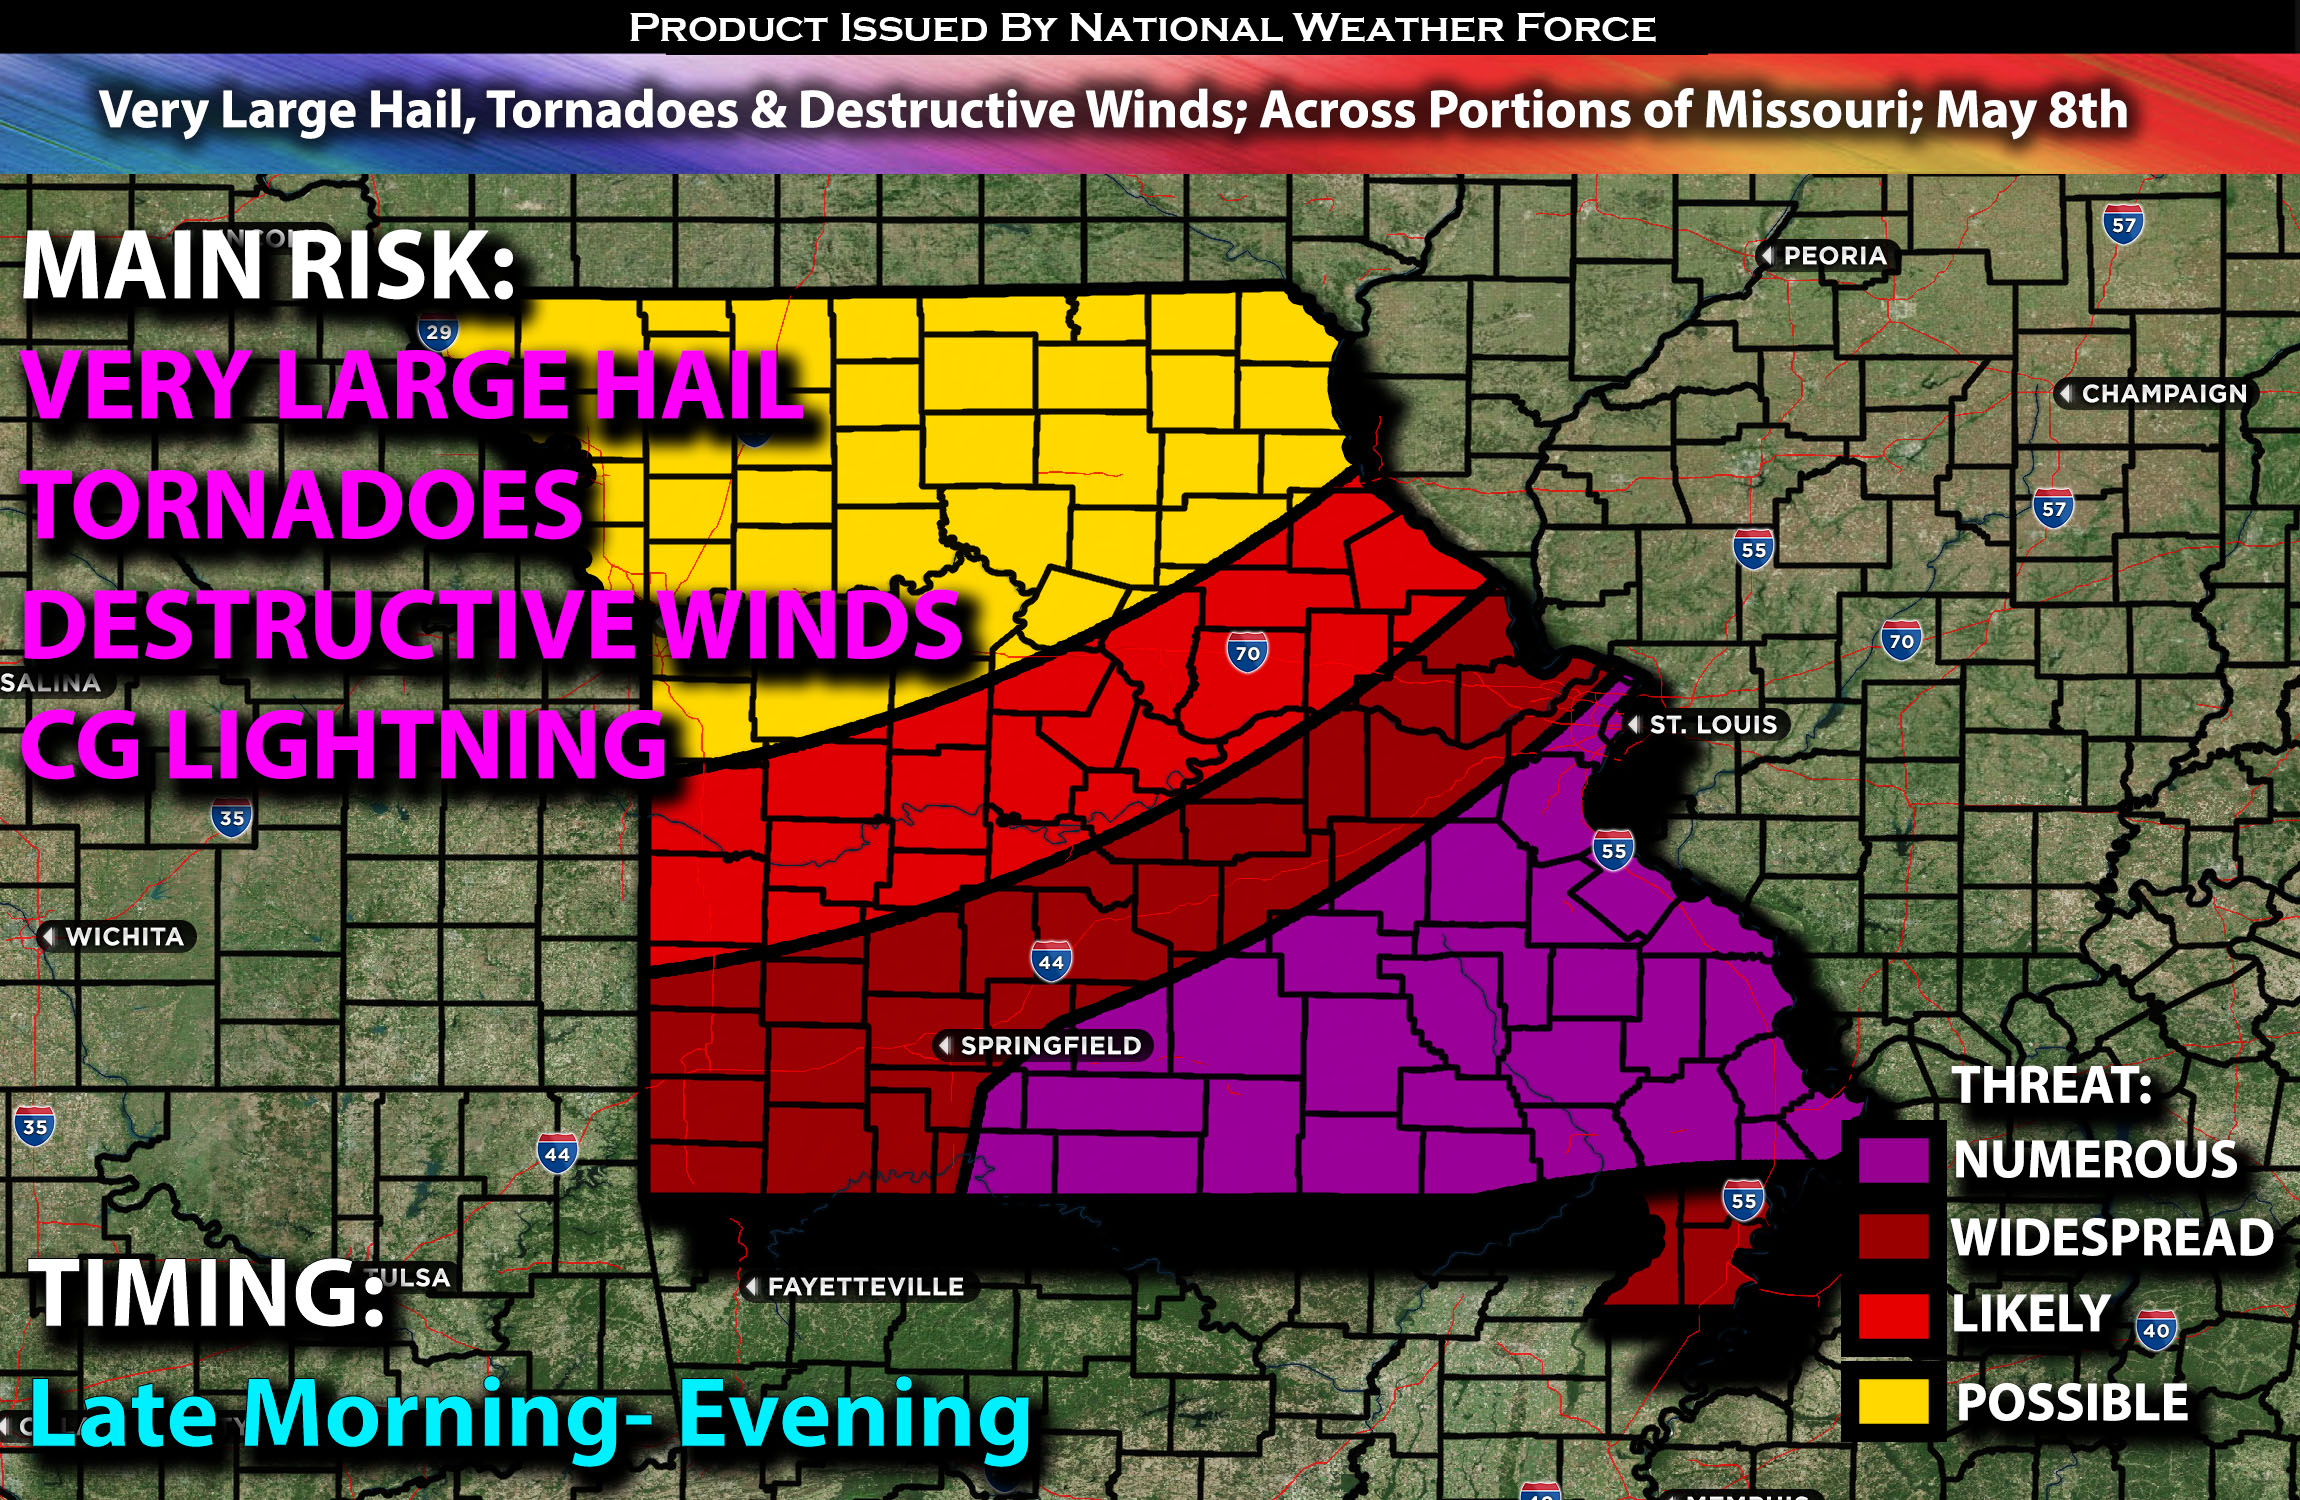 Very Large Hail, Tornadoes & Destructive Winds; Across Portions of Missouri; May 8th